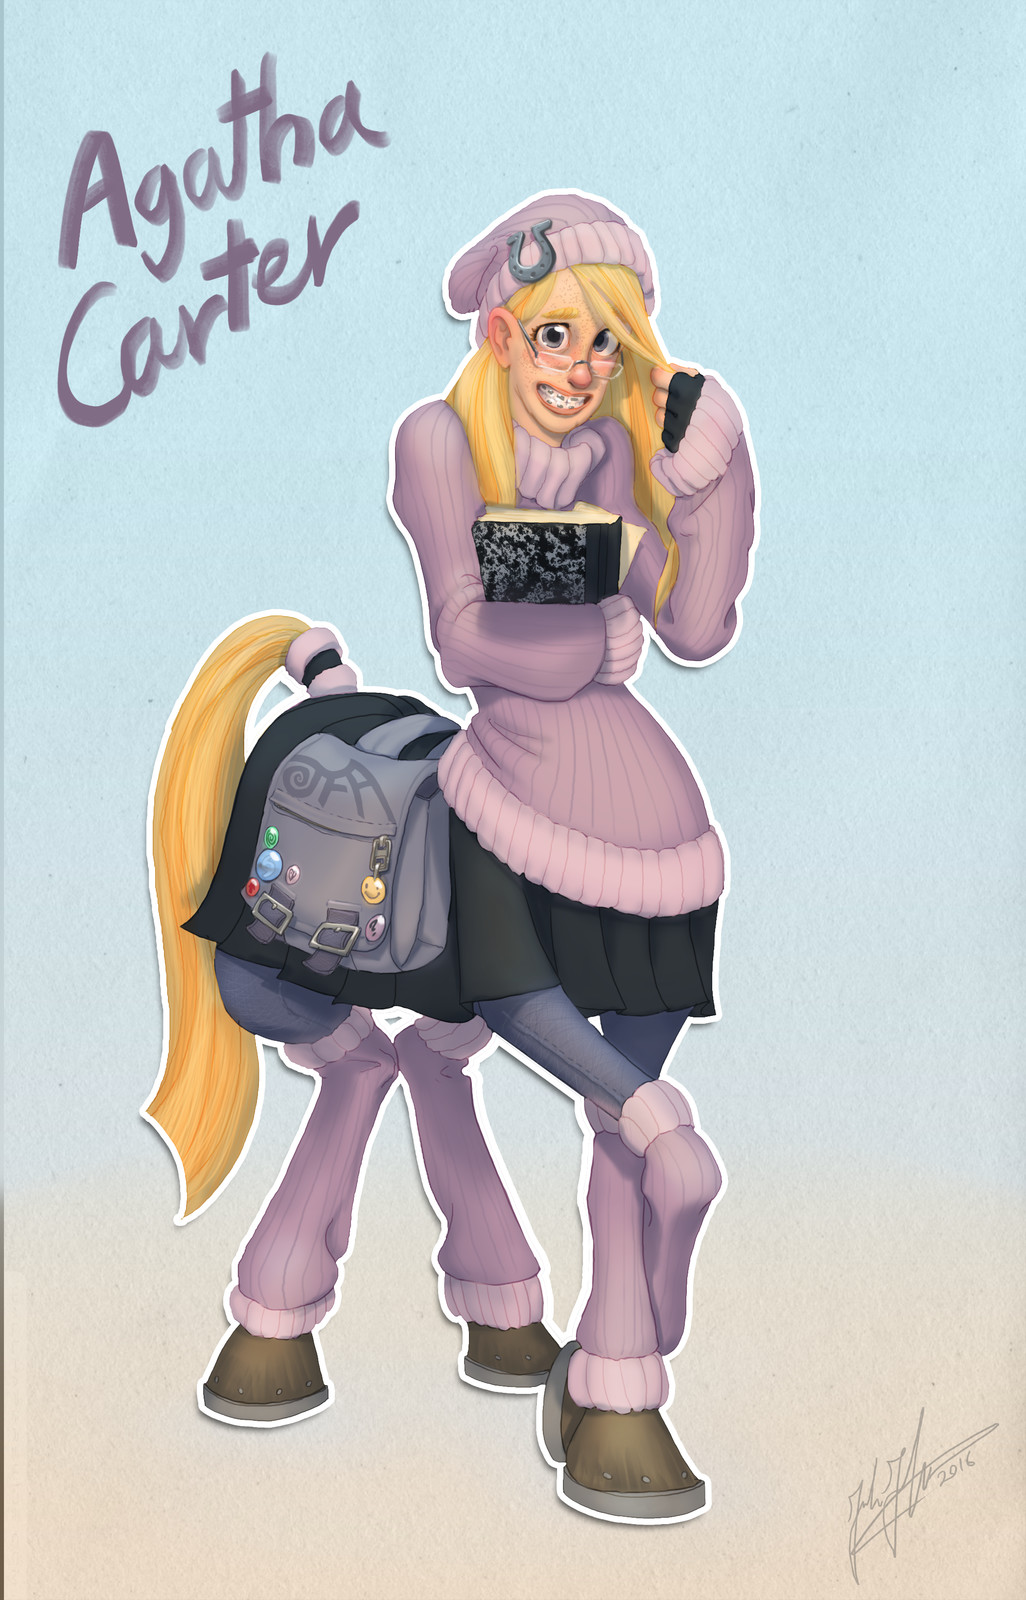 It's back to school for Agatha Carter!
You thought being a teenager was awkward? Try being a centaur at Houyhnhnm High! What heartwarming shenanigans will this year have in store for us?

Centaur - September 2016